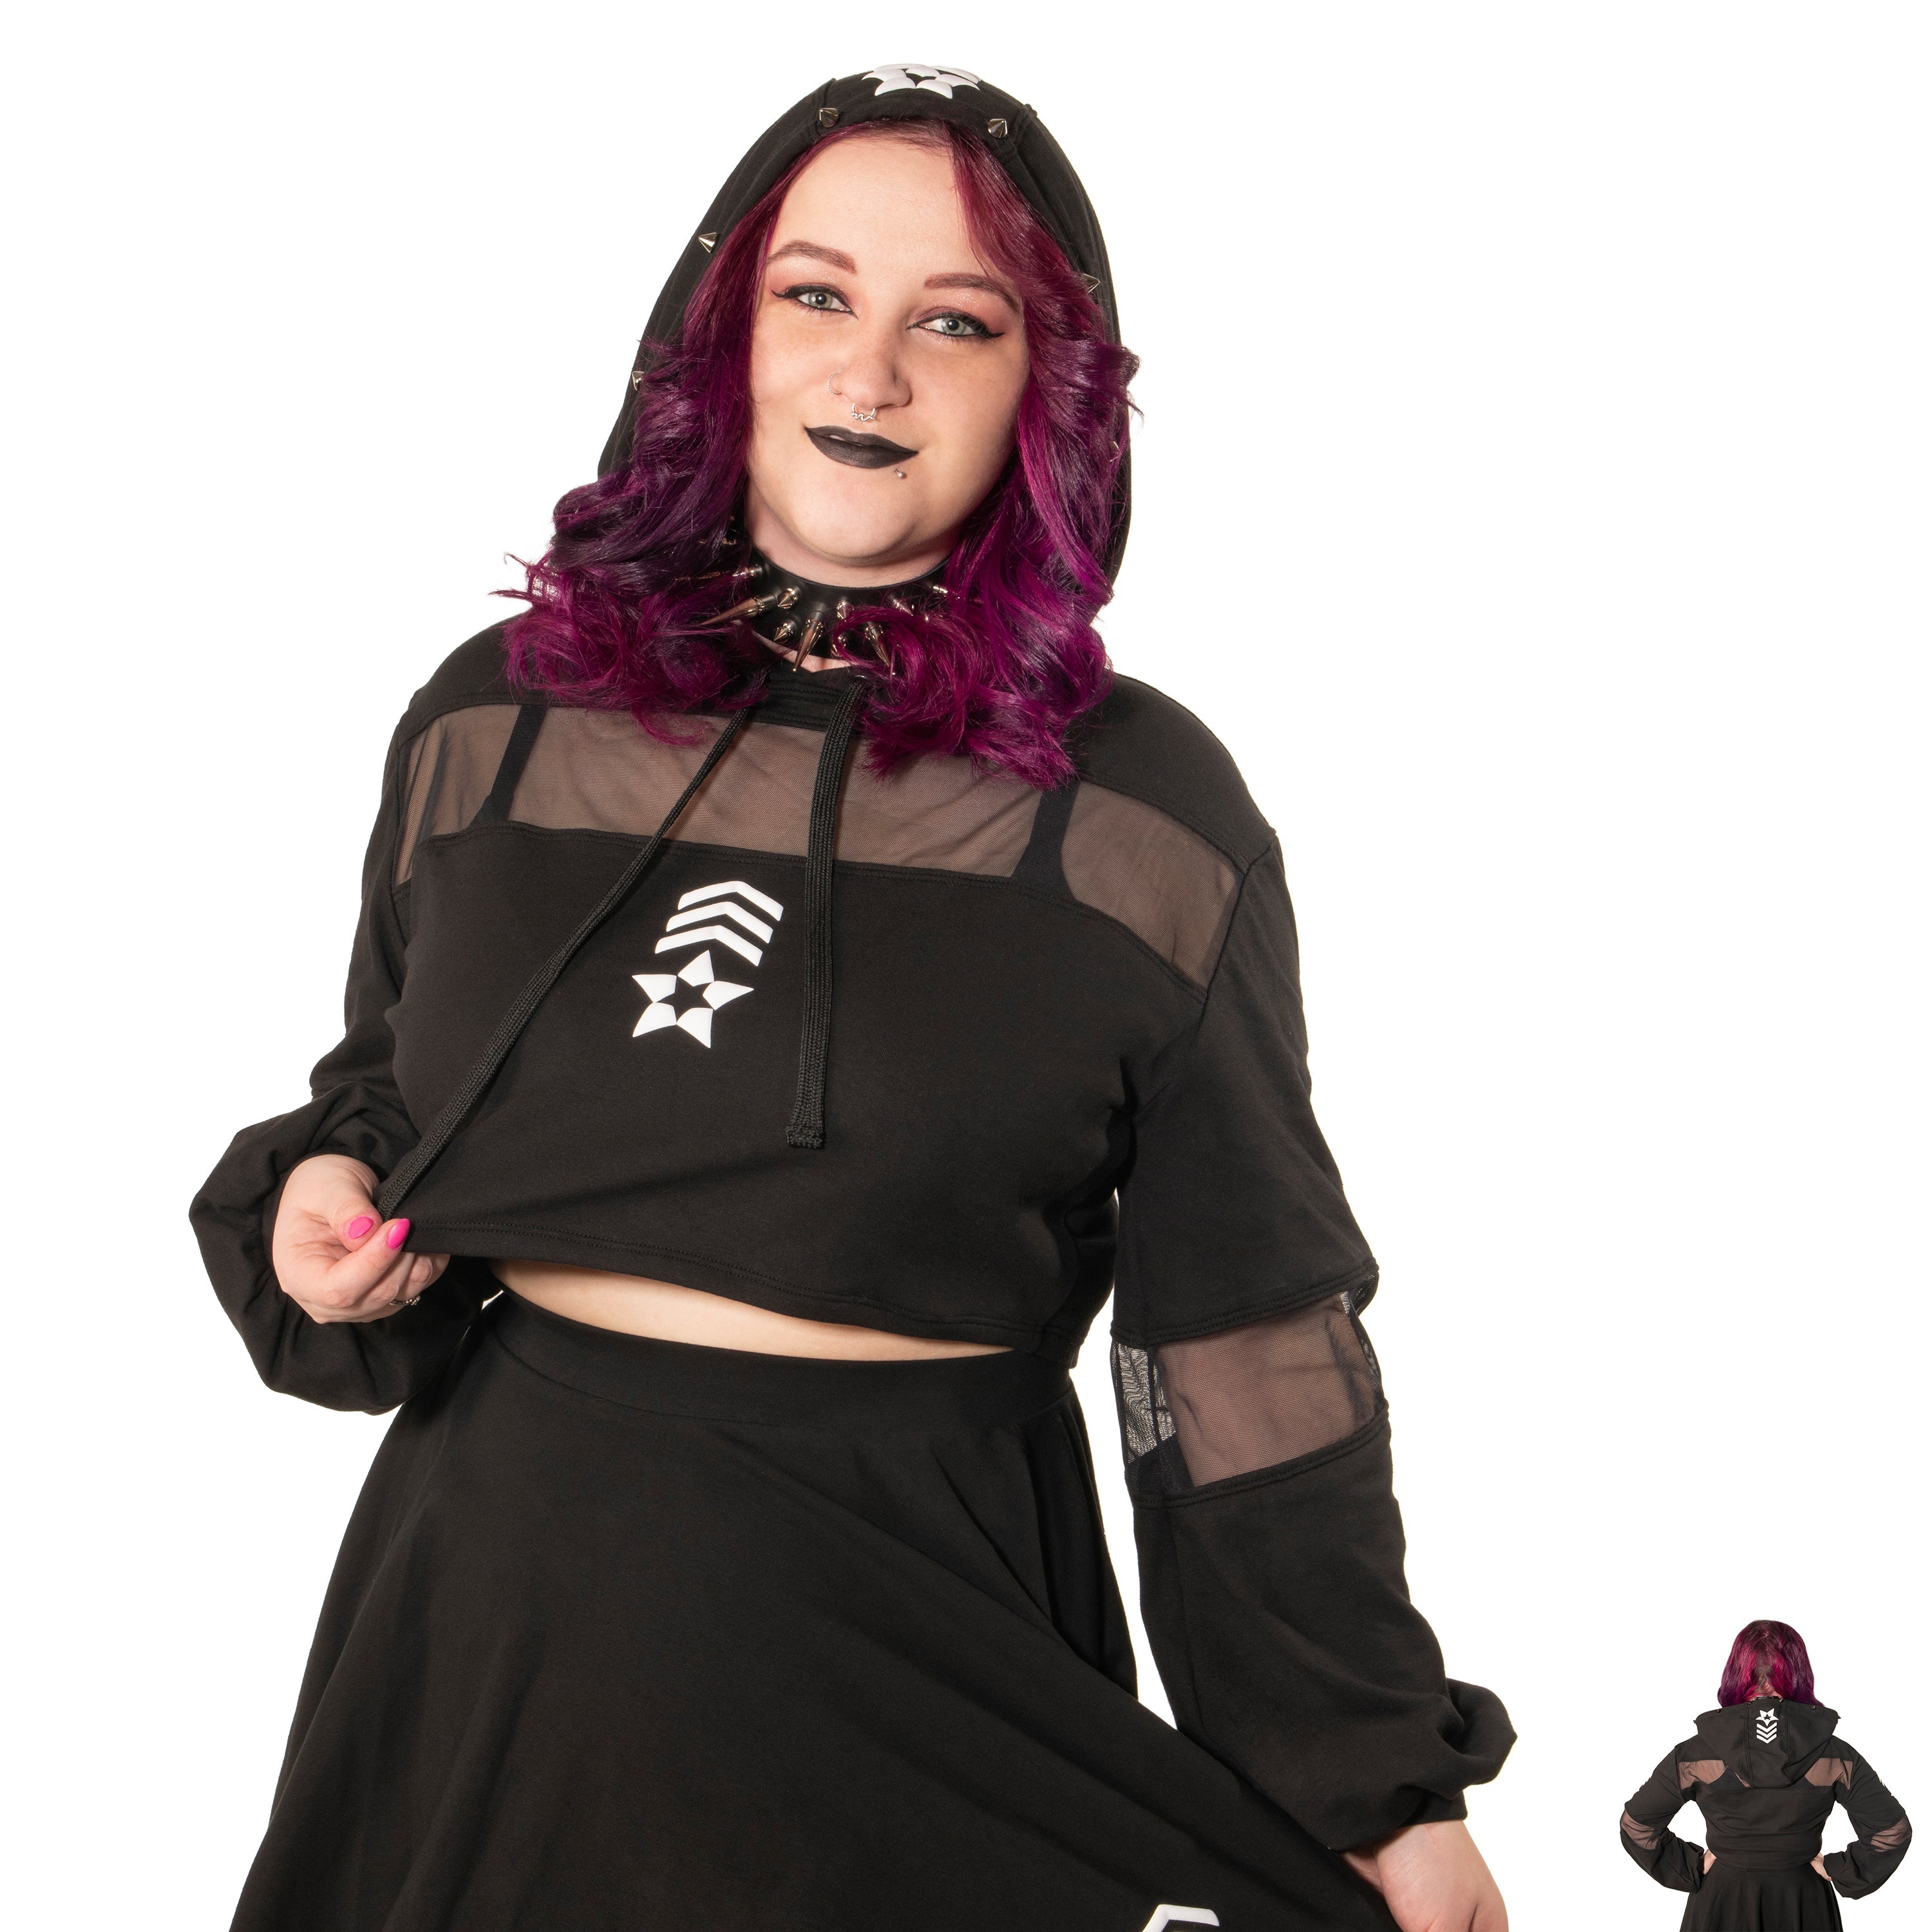 S.I. Spiked Crop Hoodie - Pawstar dsfusion Shrug goth, outerwear, sale, ship-15, ship-30day, tops